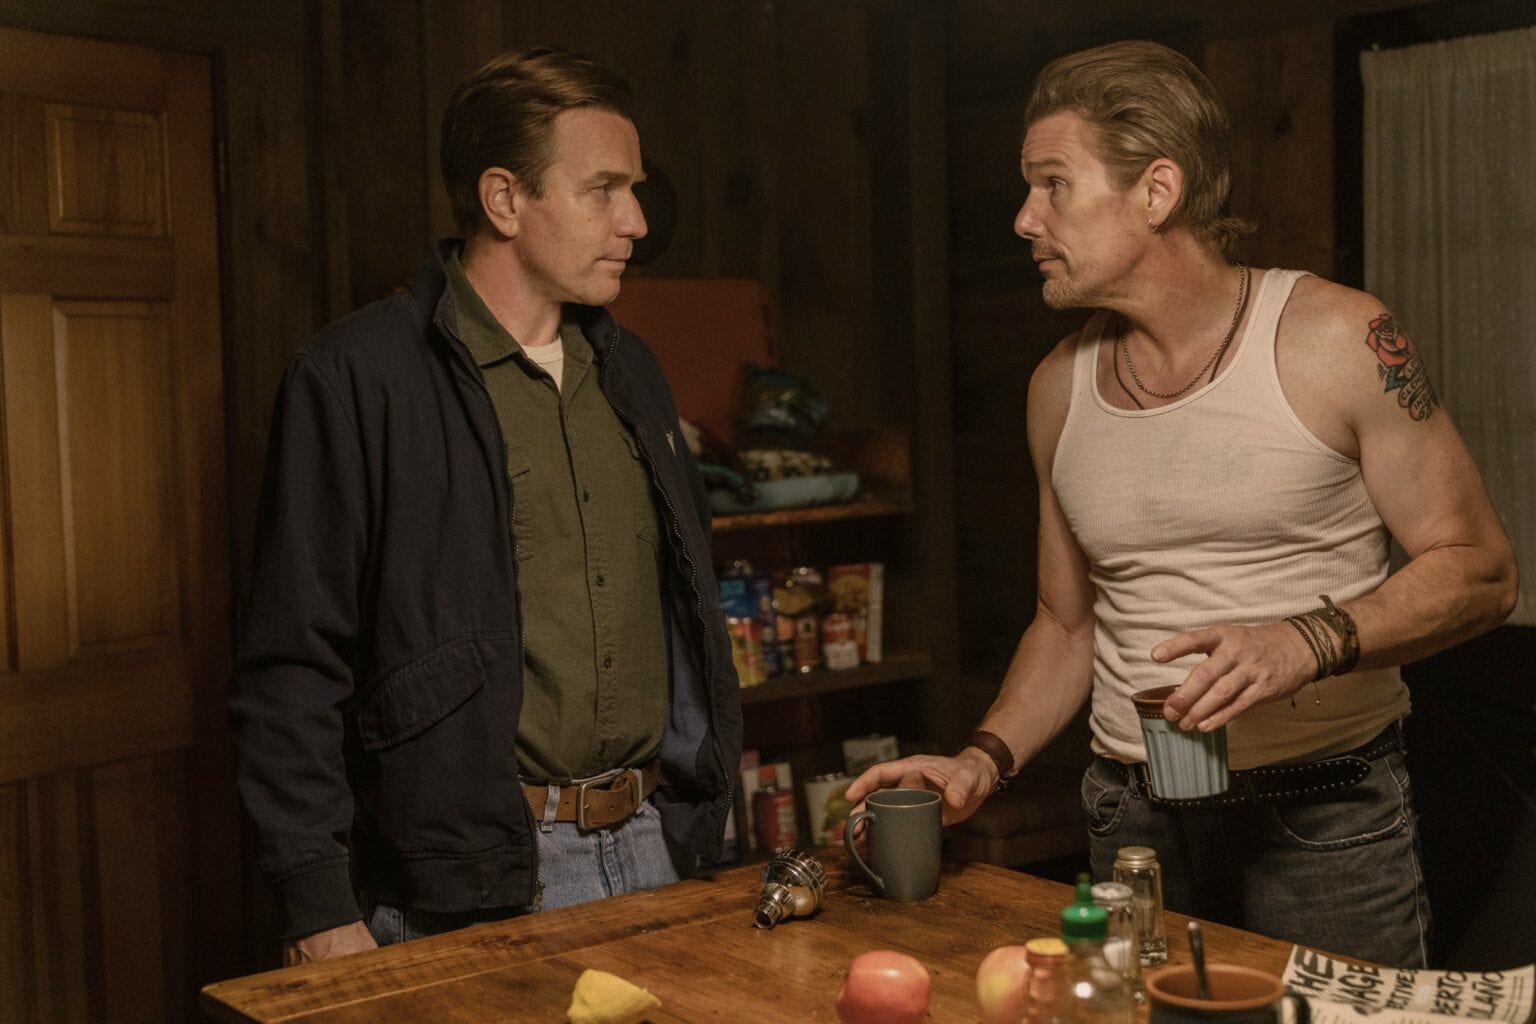 Raymond & Ray review Apple TV+: Half-brothers Raymond (played by Ewan McGregor, left) and Ray (Ethan Hawke) must come to terms with their father's weird posthumous demand.